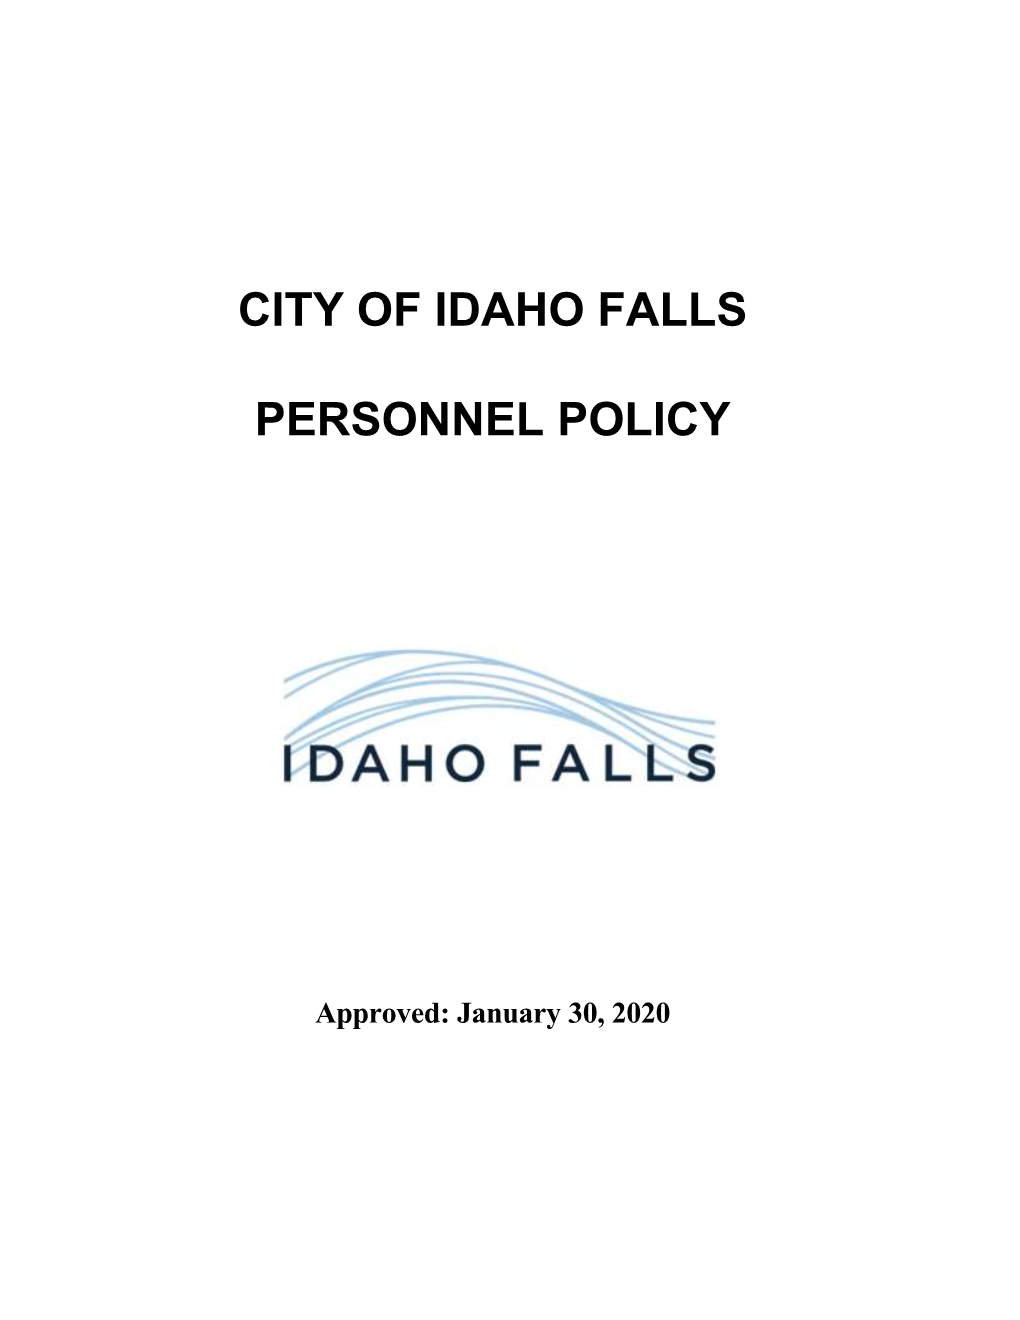 City of Idaho Falls Personnel Policy